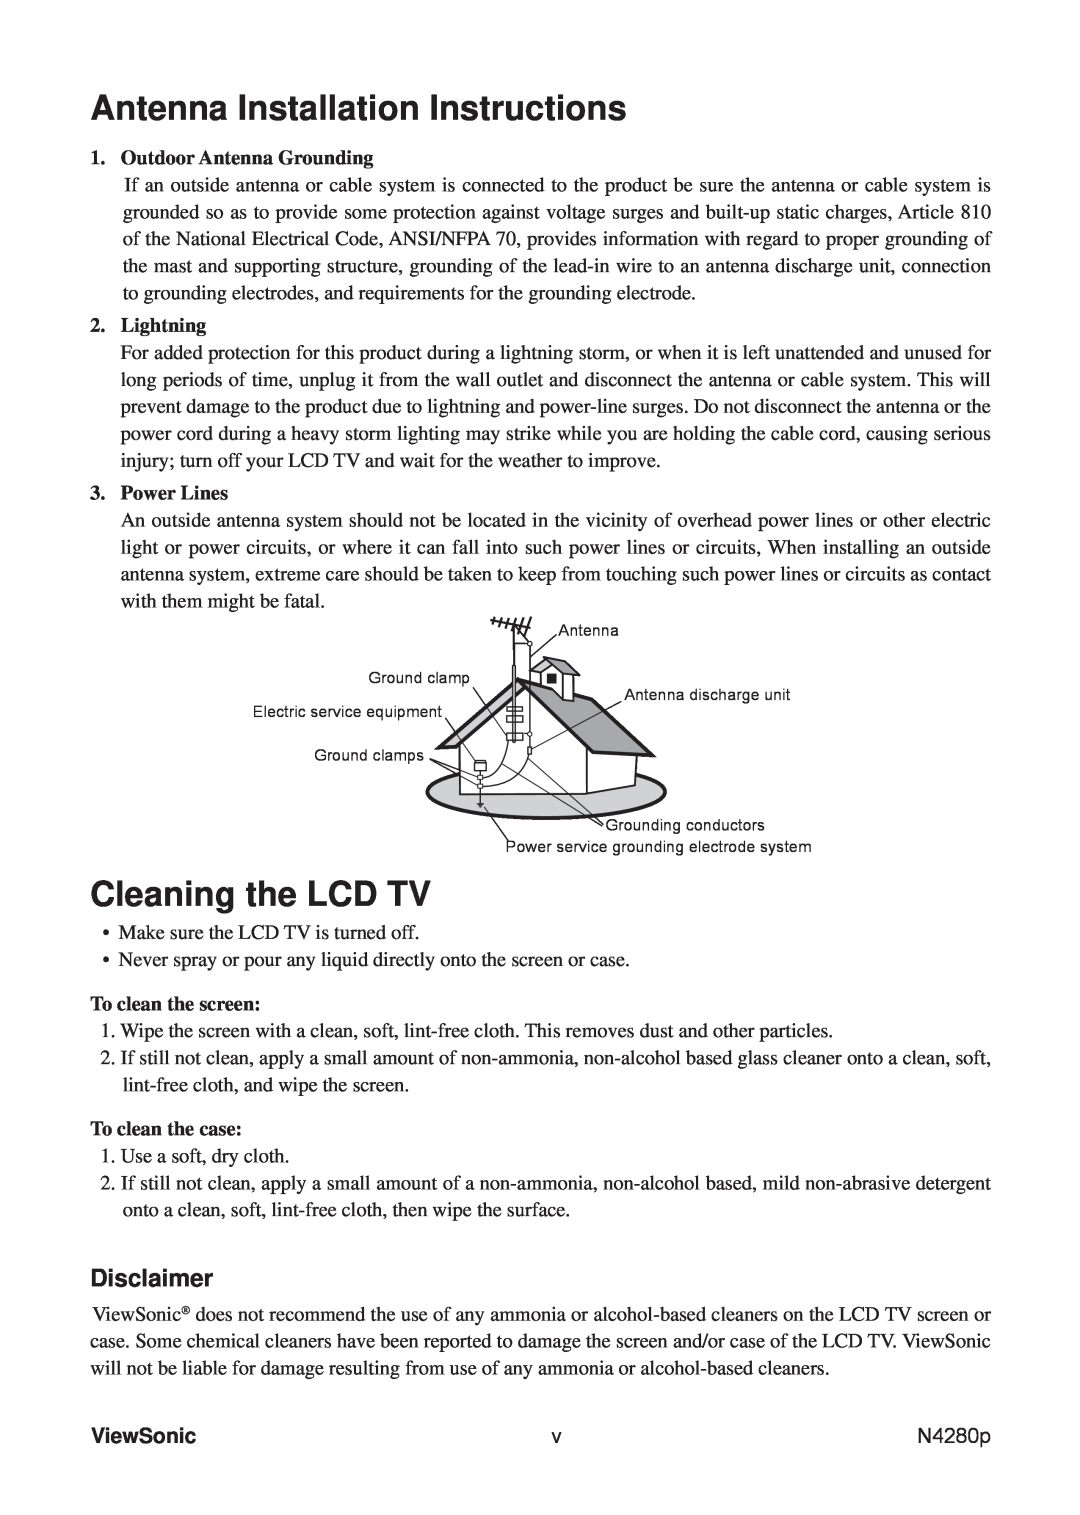 ViewSonic N4280p Antenna Installation Instructions, Cleaning the LCD TV, Disclaimer, ViewSonic, Outdoor Antenna Grounding 